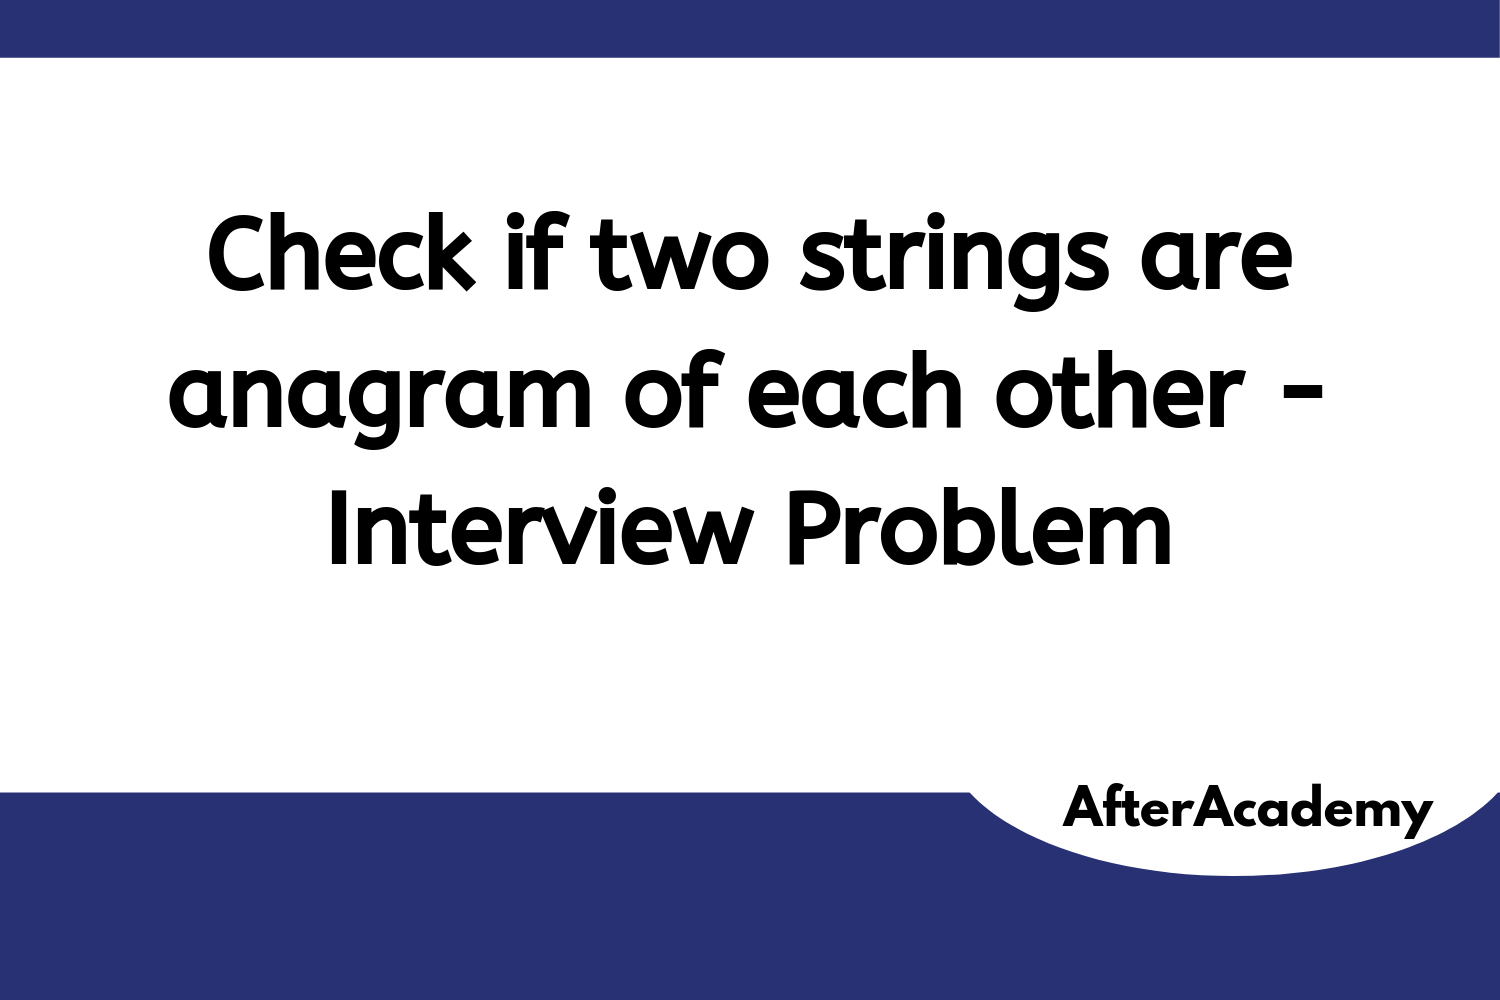 Check if two strings are anagrams of each other - Interview Problem